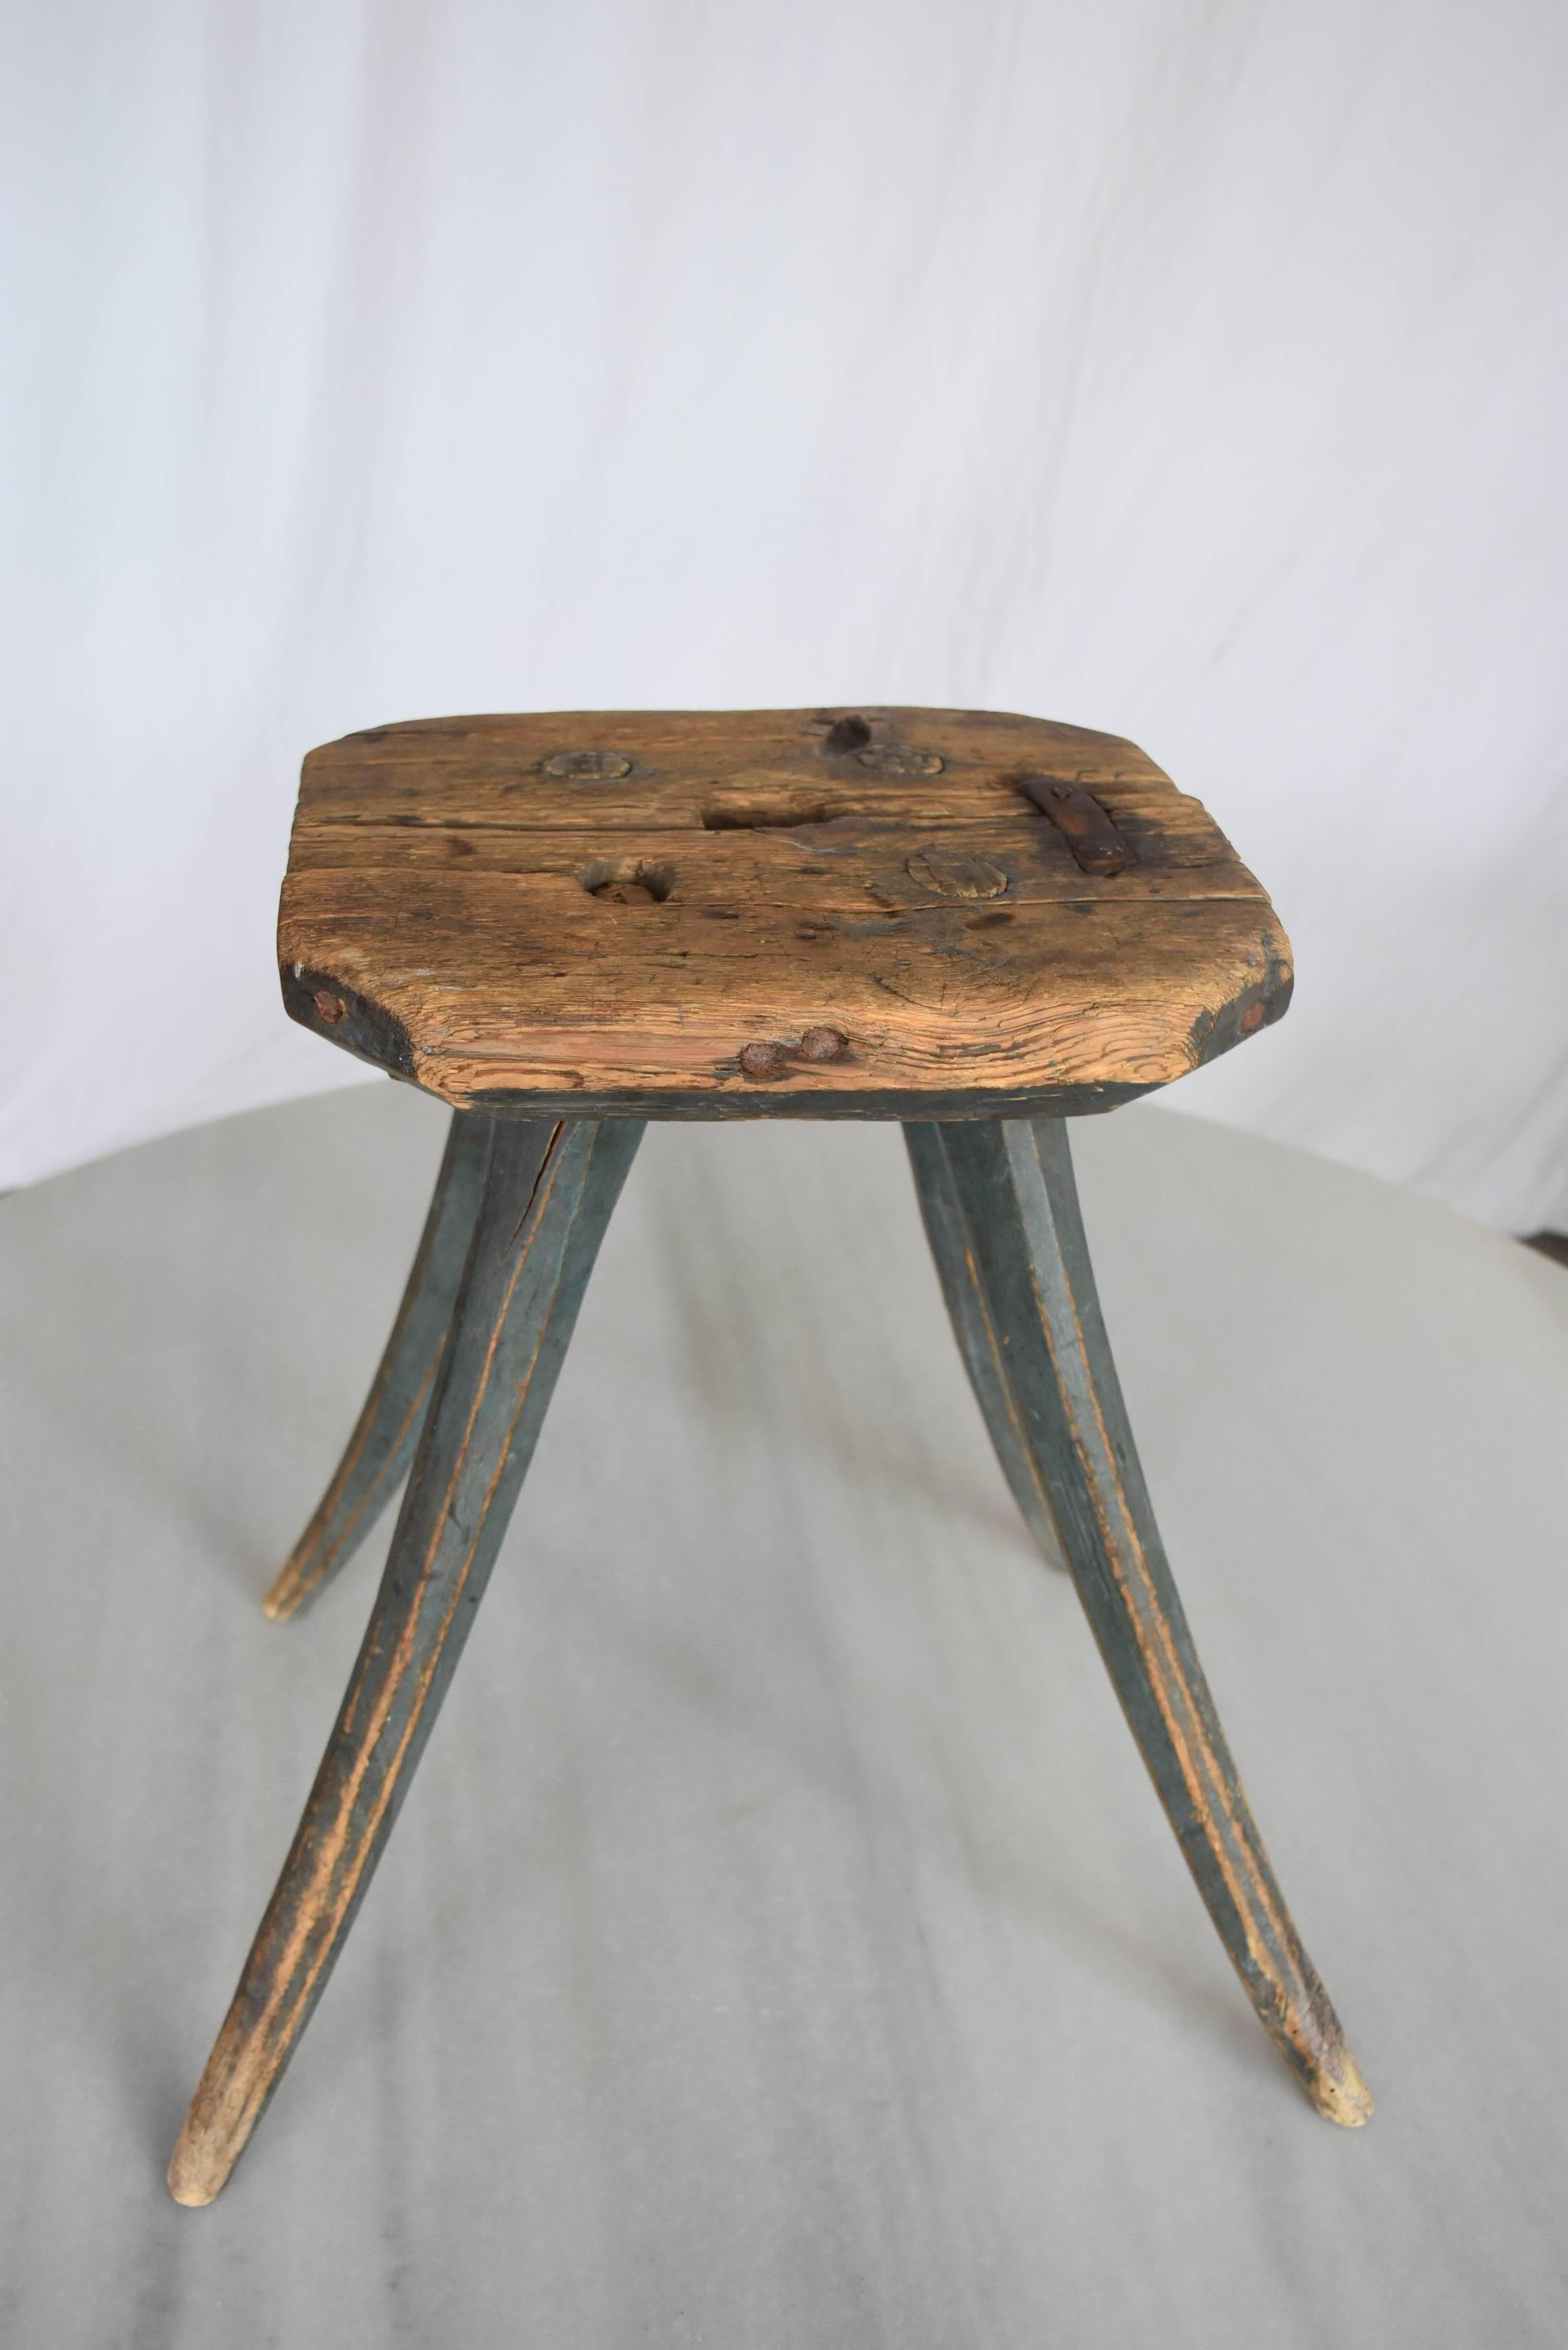 Hand-Crafted 19th Century Swedish Painted Blue Folk Art Stool or Small Side Table